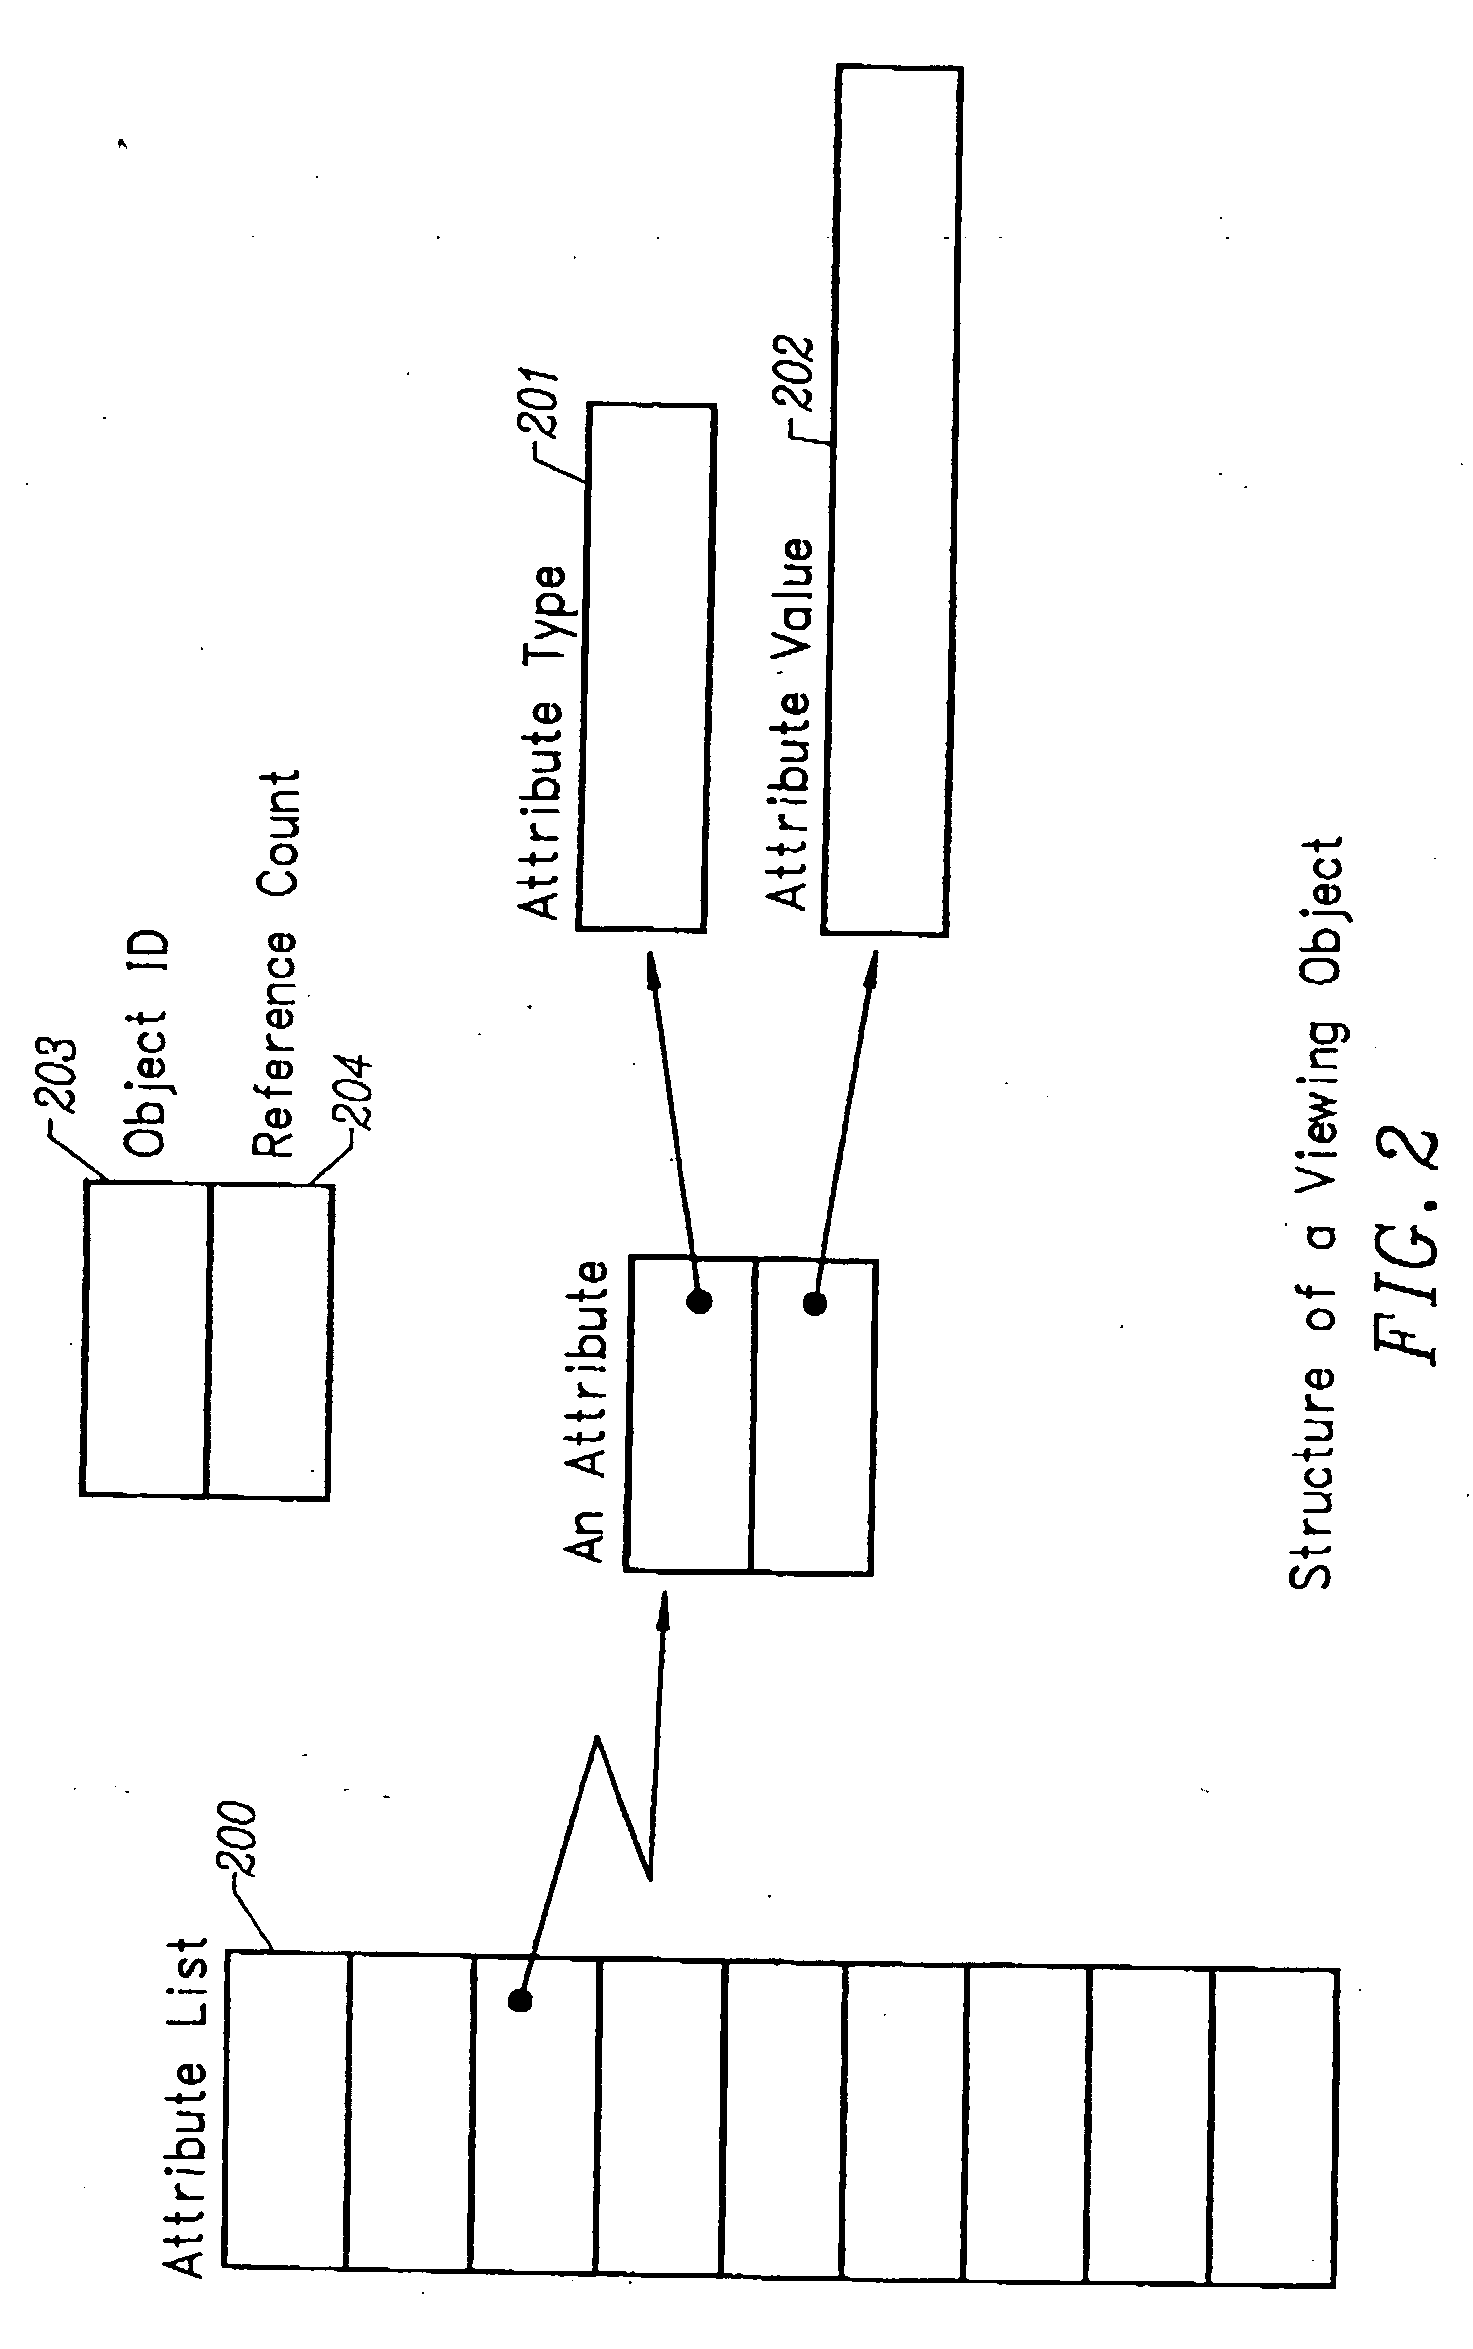 Client-side multimedia content targeting system